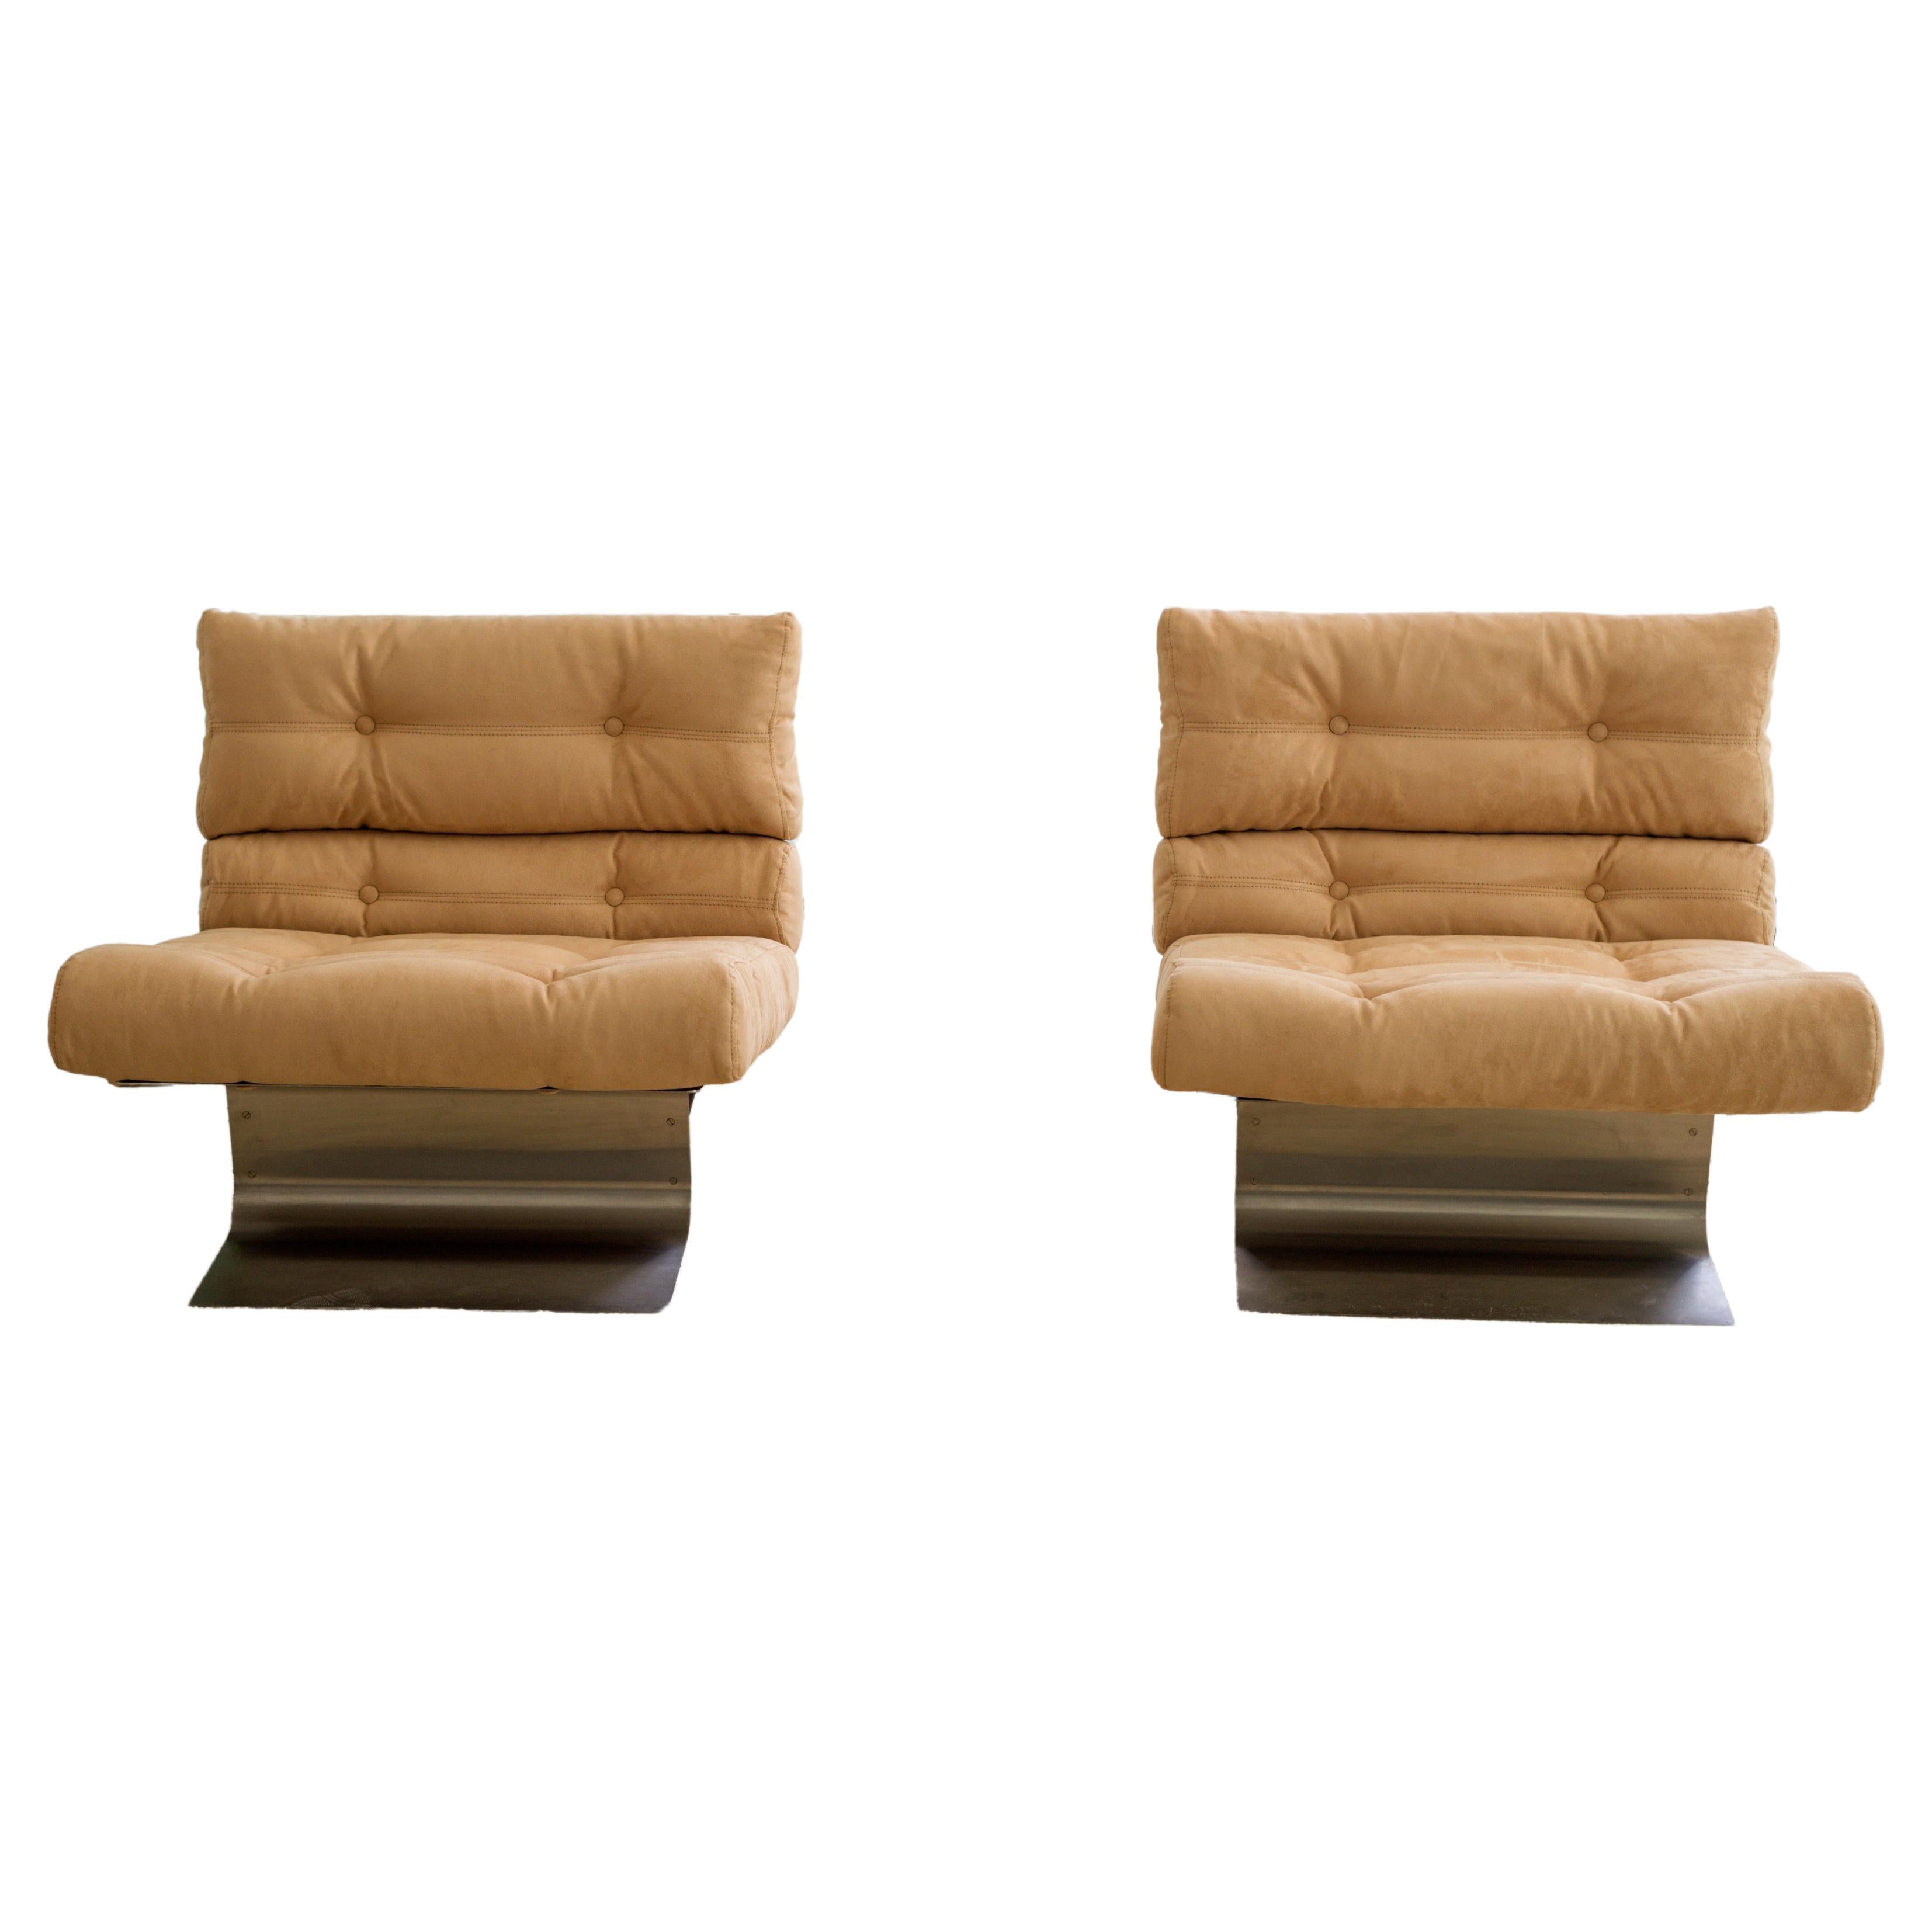 1972 'Kappa' Pair of Armchairs by François Monnet